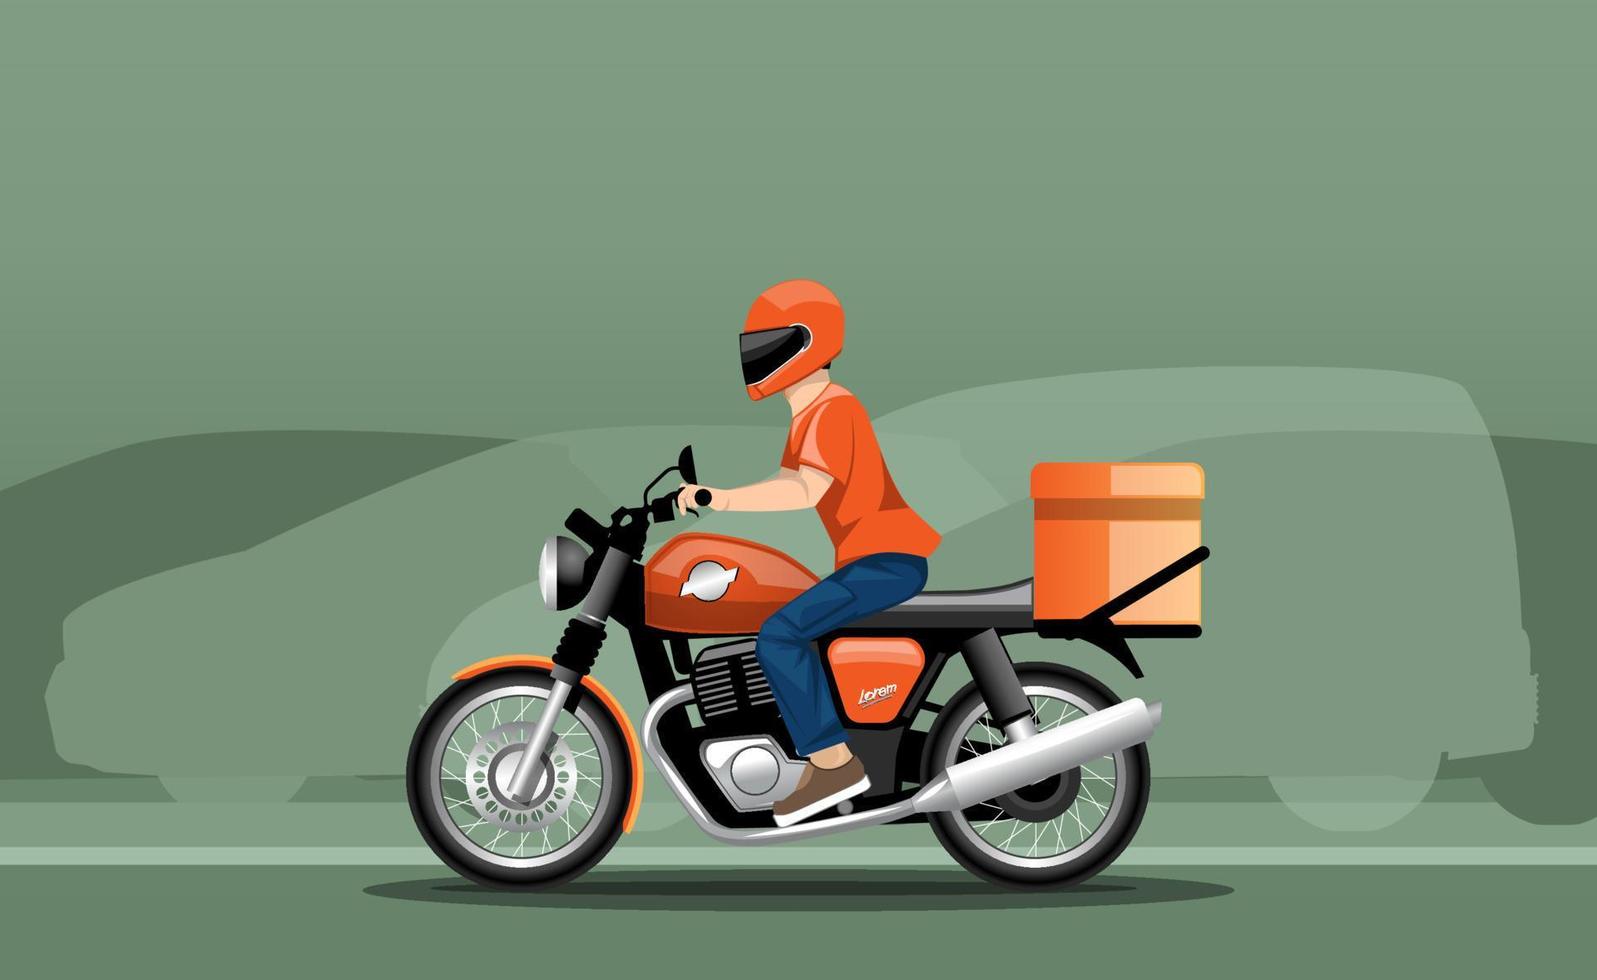 Illustration of a delivery man in motion on a motorcycle against a background of traffic. vector